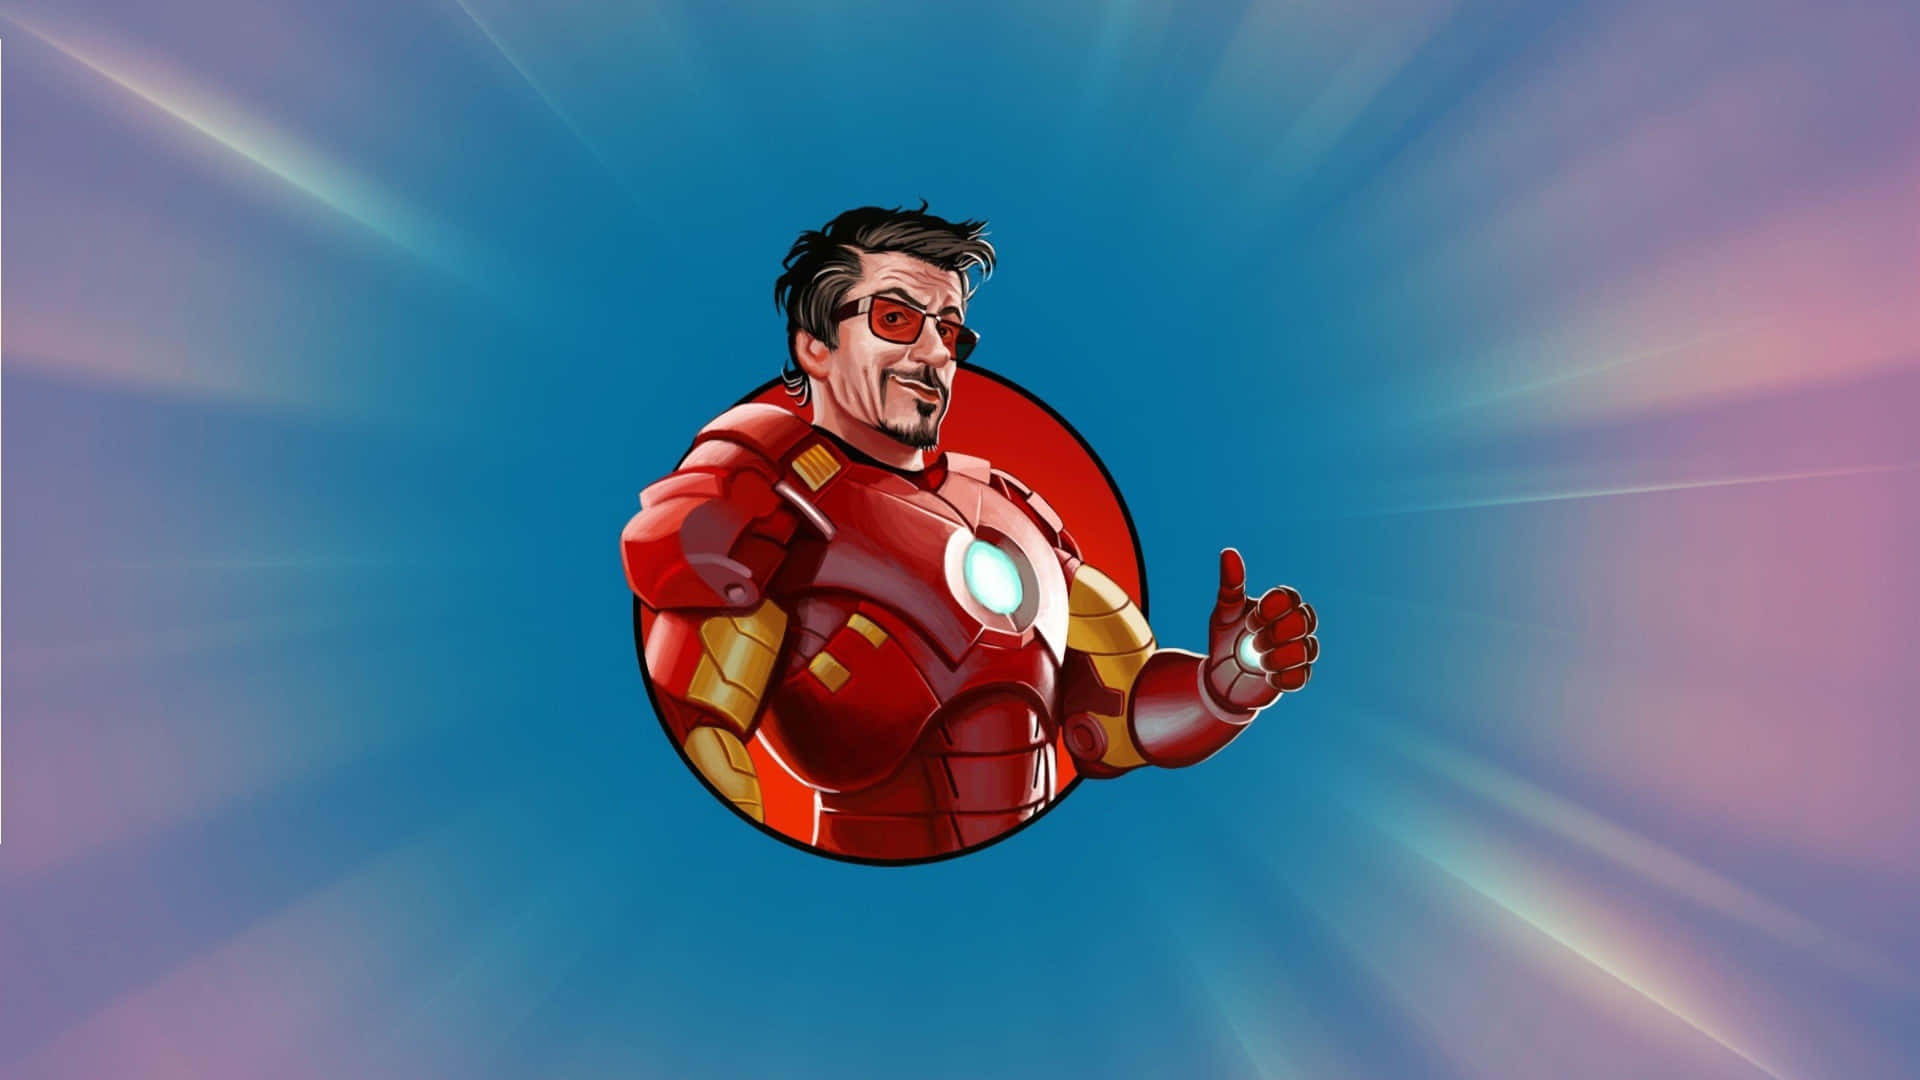 Animated Iron Man Flying Gesture Wallpaper